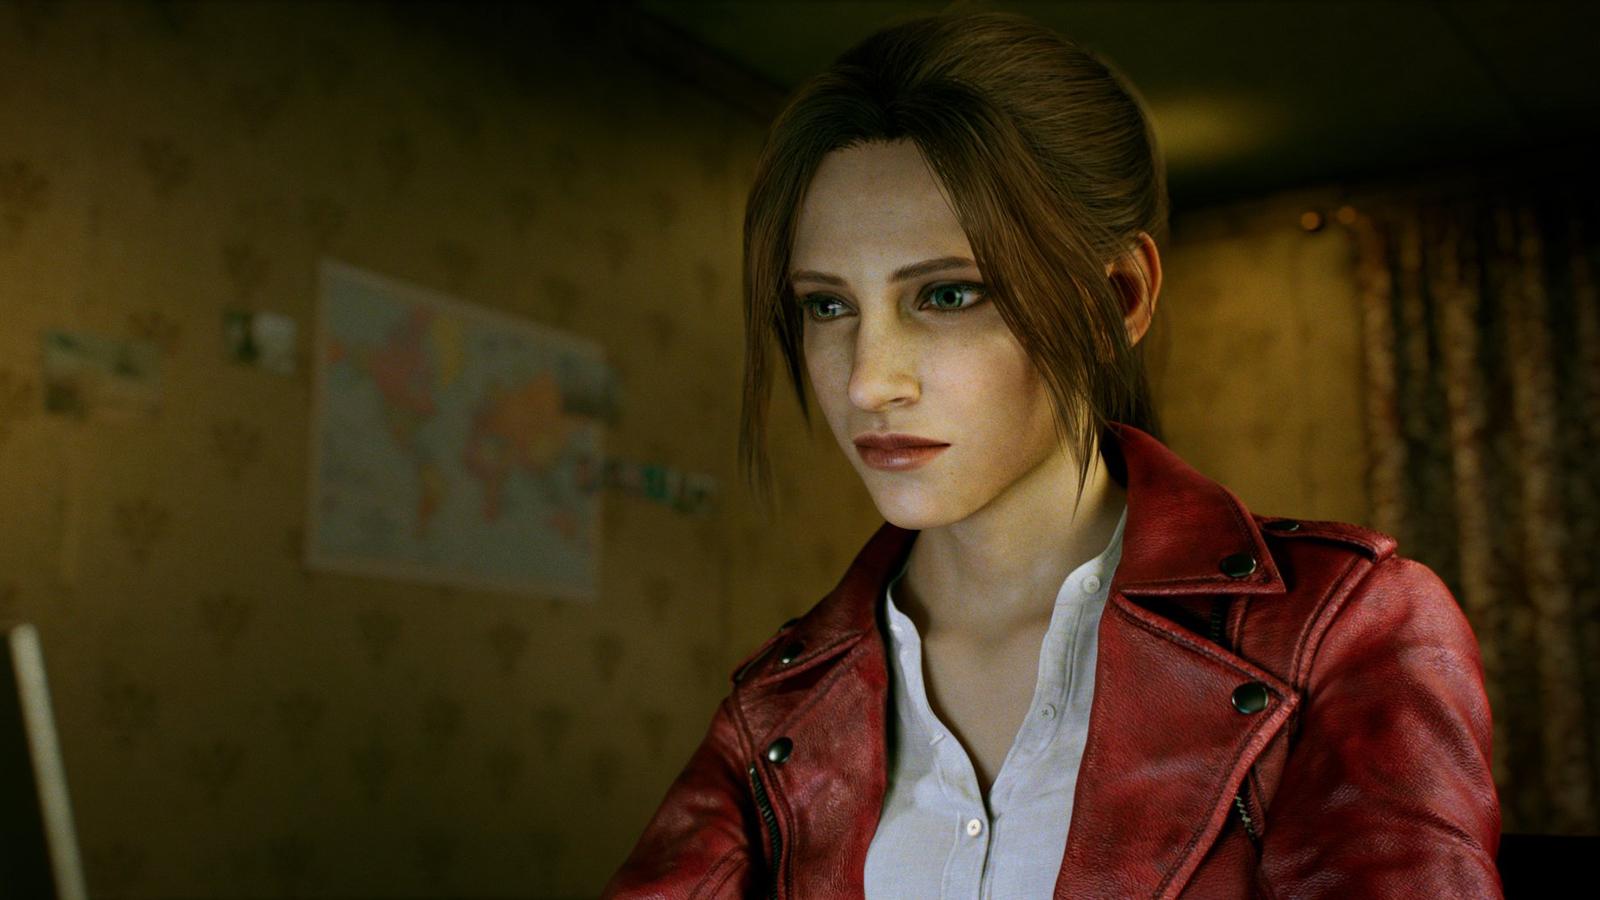 Claire Redfield in Resident Evil Infinite Darkness on Netflix